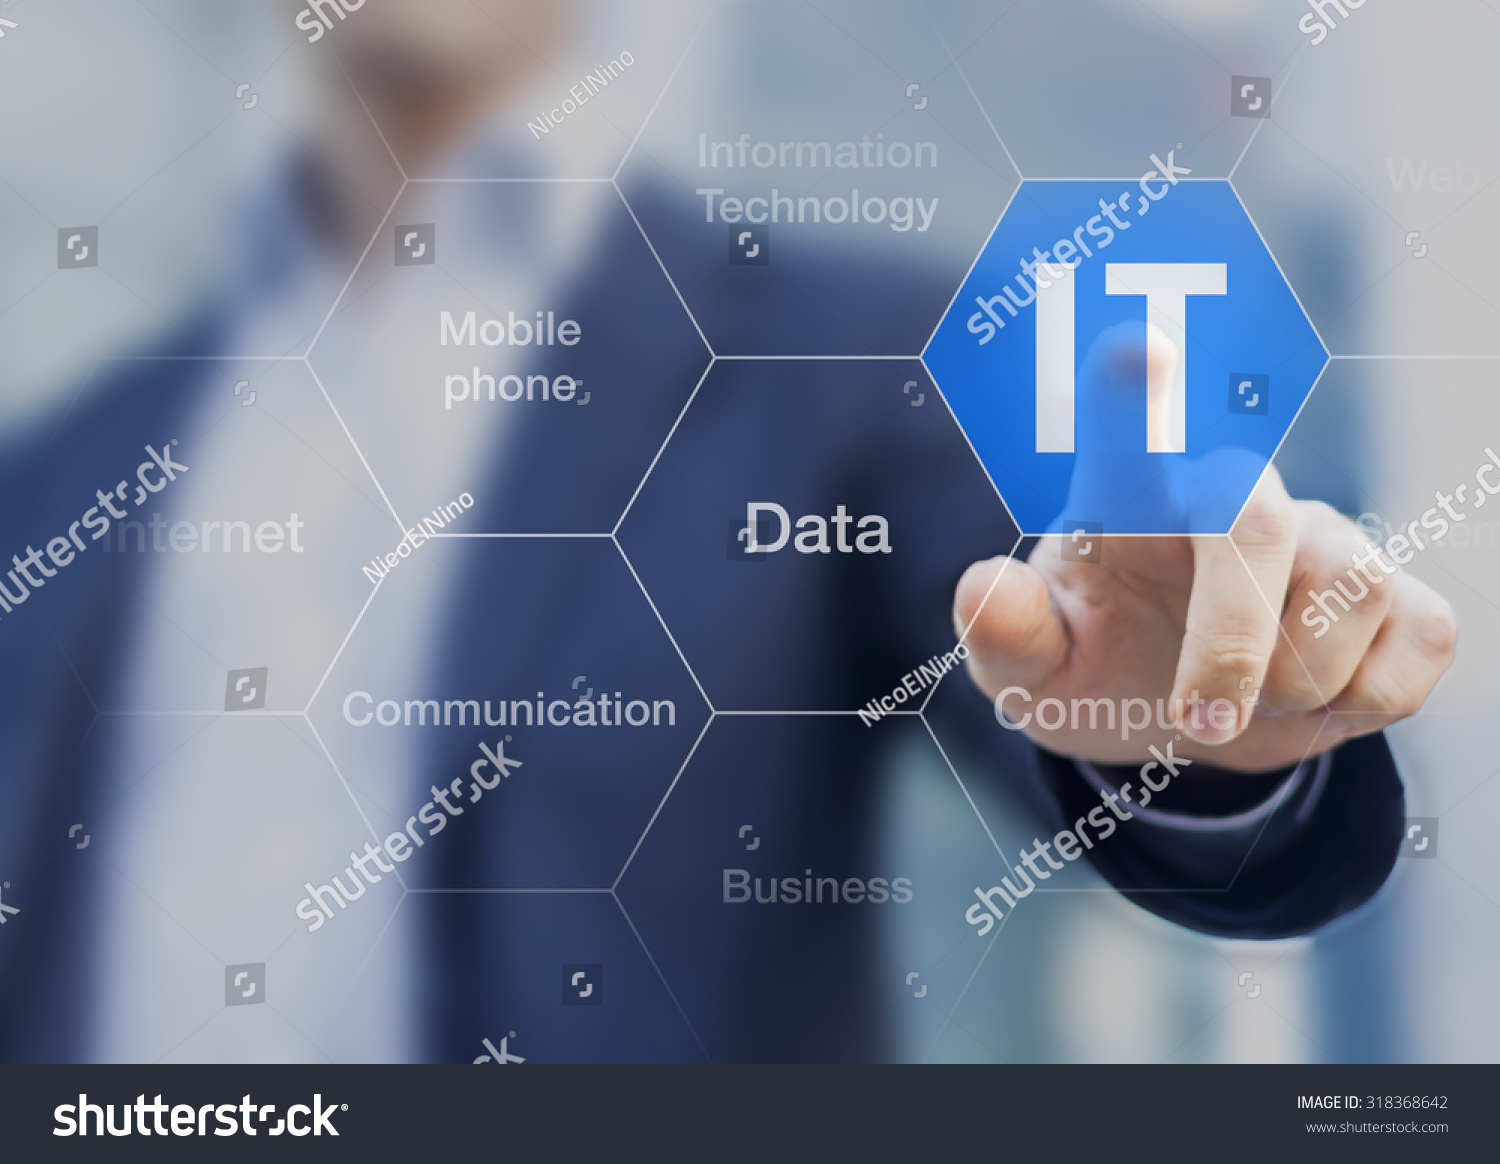 IT consultant presenting tag cloud about information technology #318368642